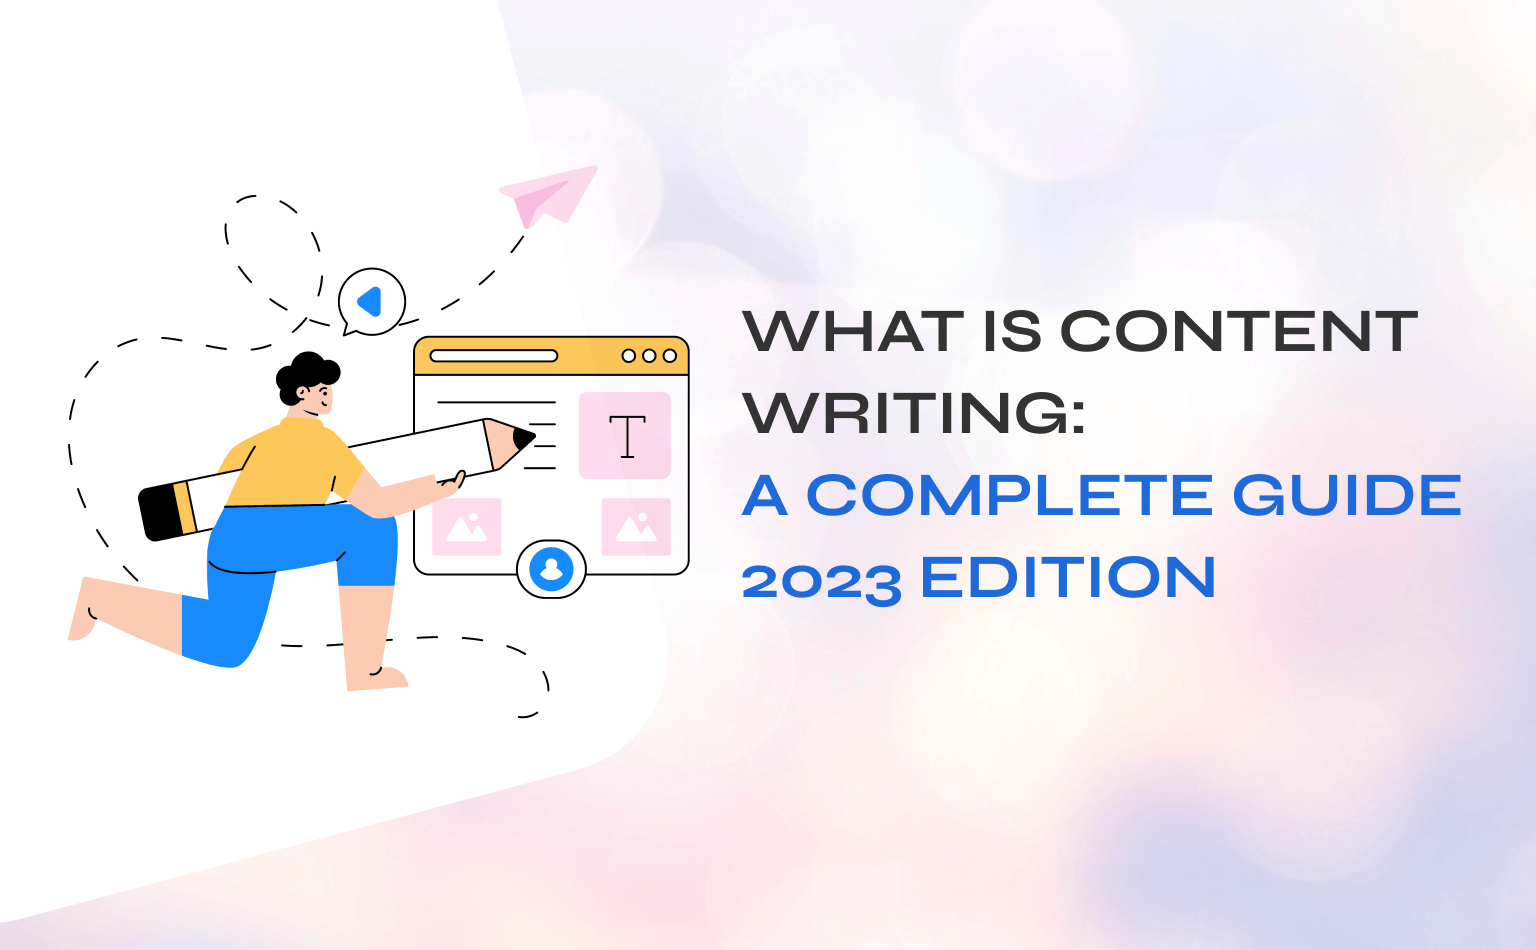 What is Content Writing: A complete guide 2023 edition